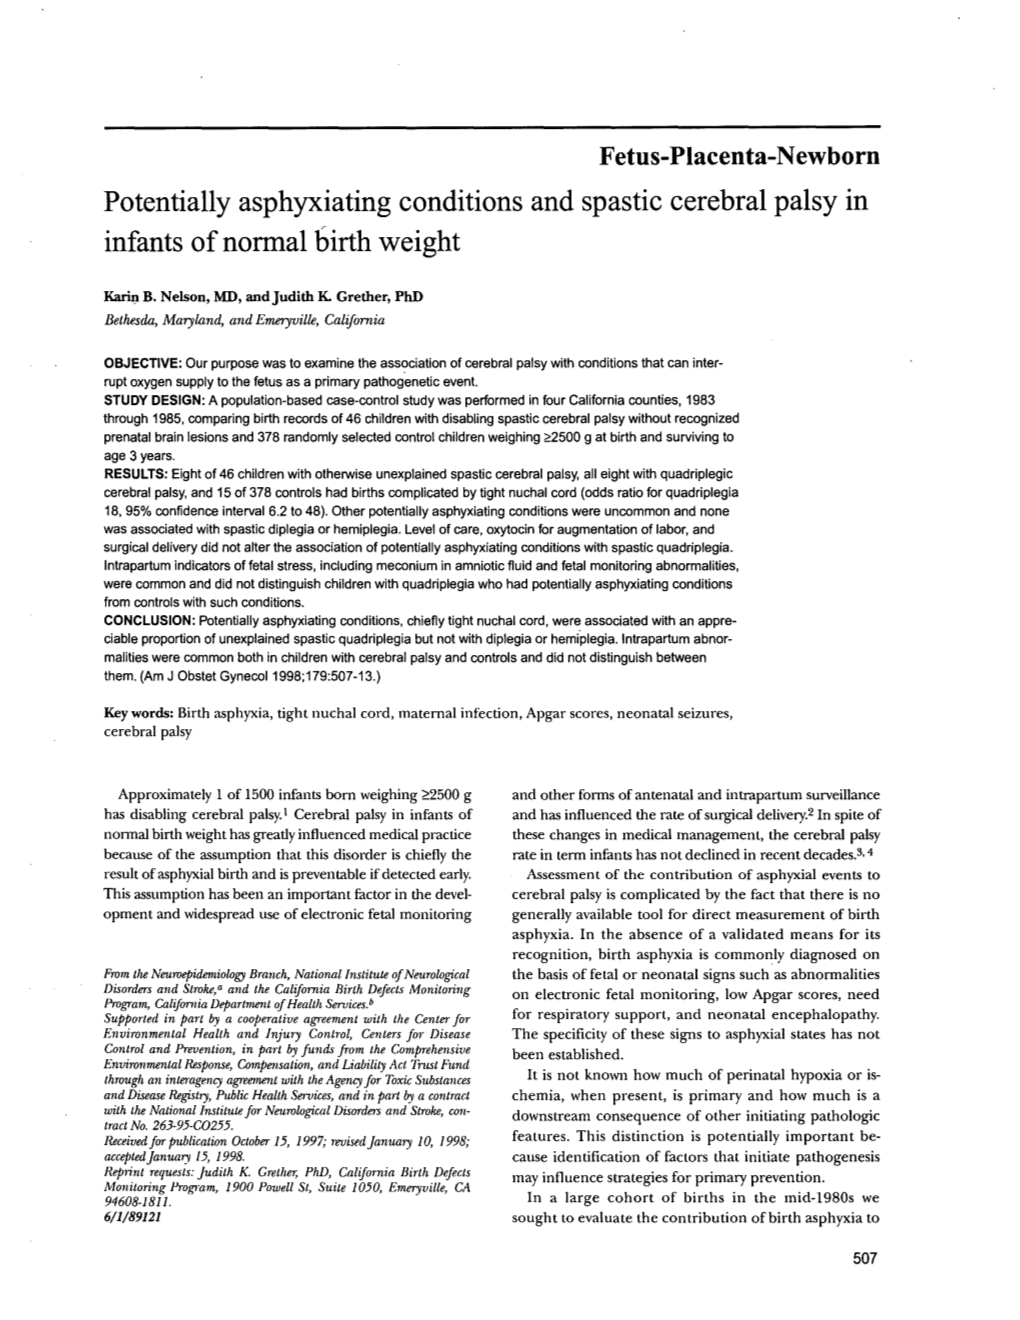 Potentially Asphyxiating Conditions and Spastic Cerebral Palsy in Infants of Normal Birth Weight